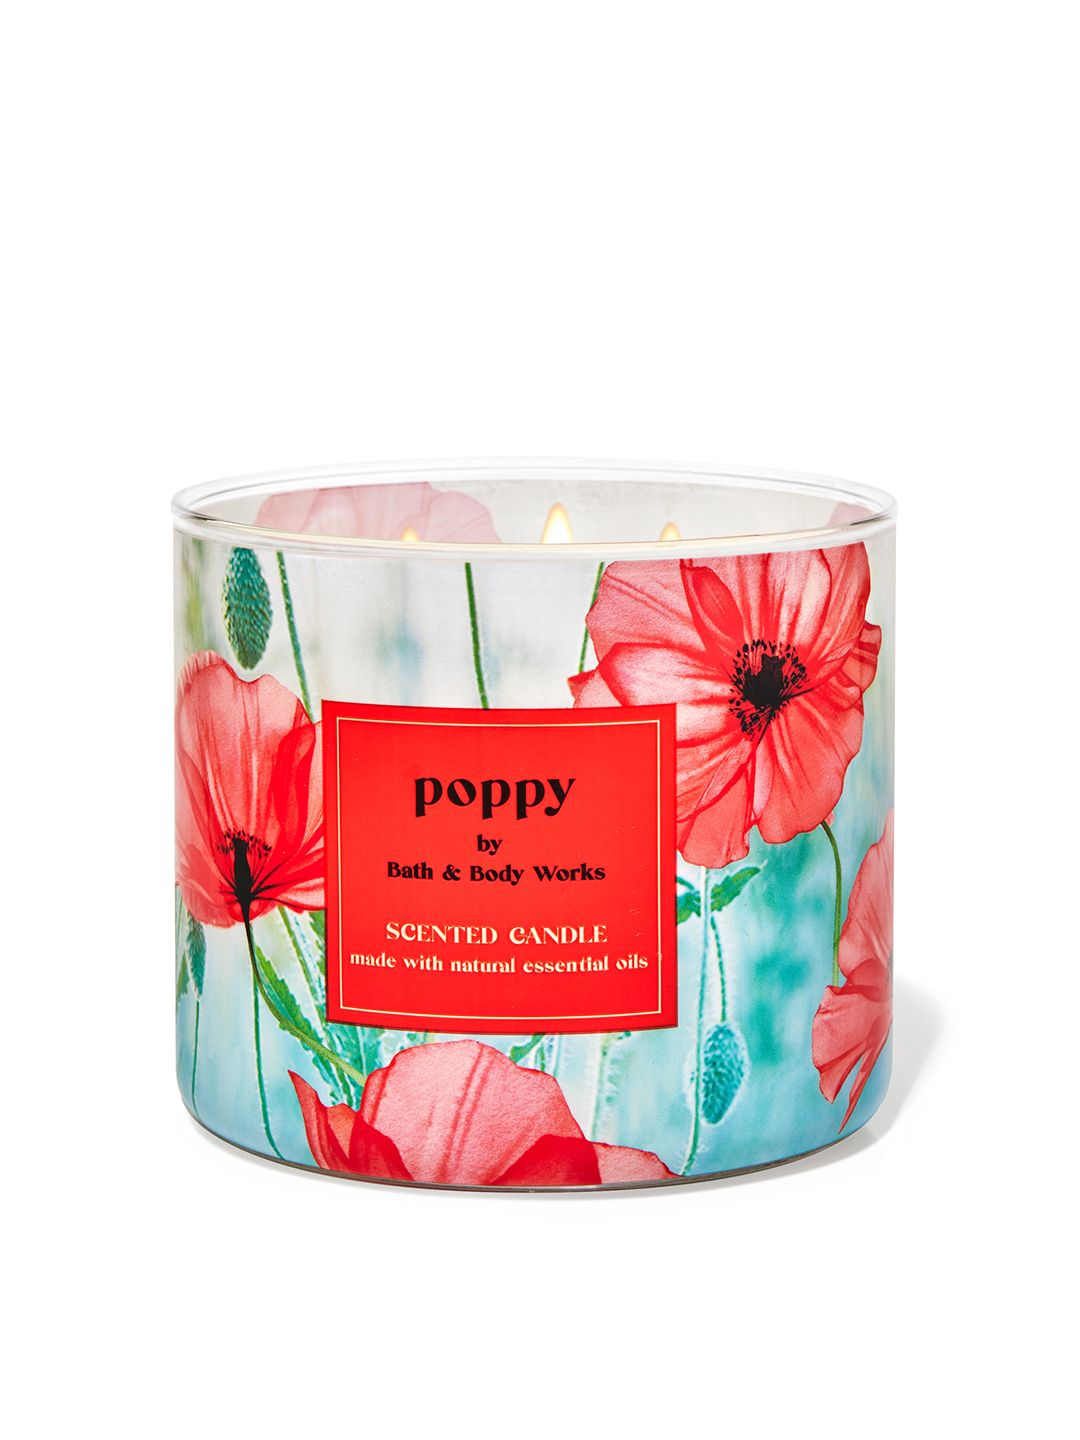 Bath & Body Works Poppy 3-Wick Scented Candle with Natural Essential Oils - 411g Price in India